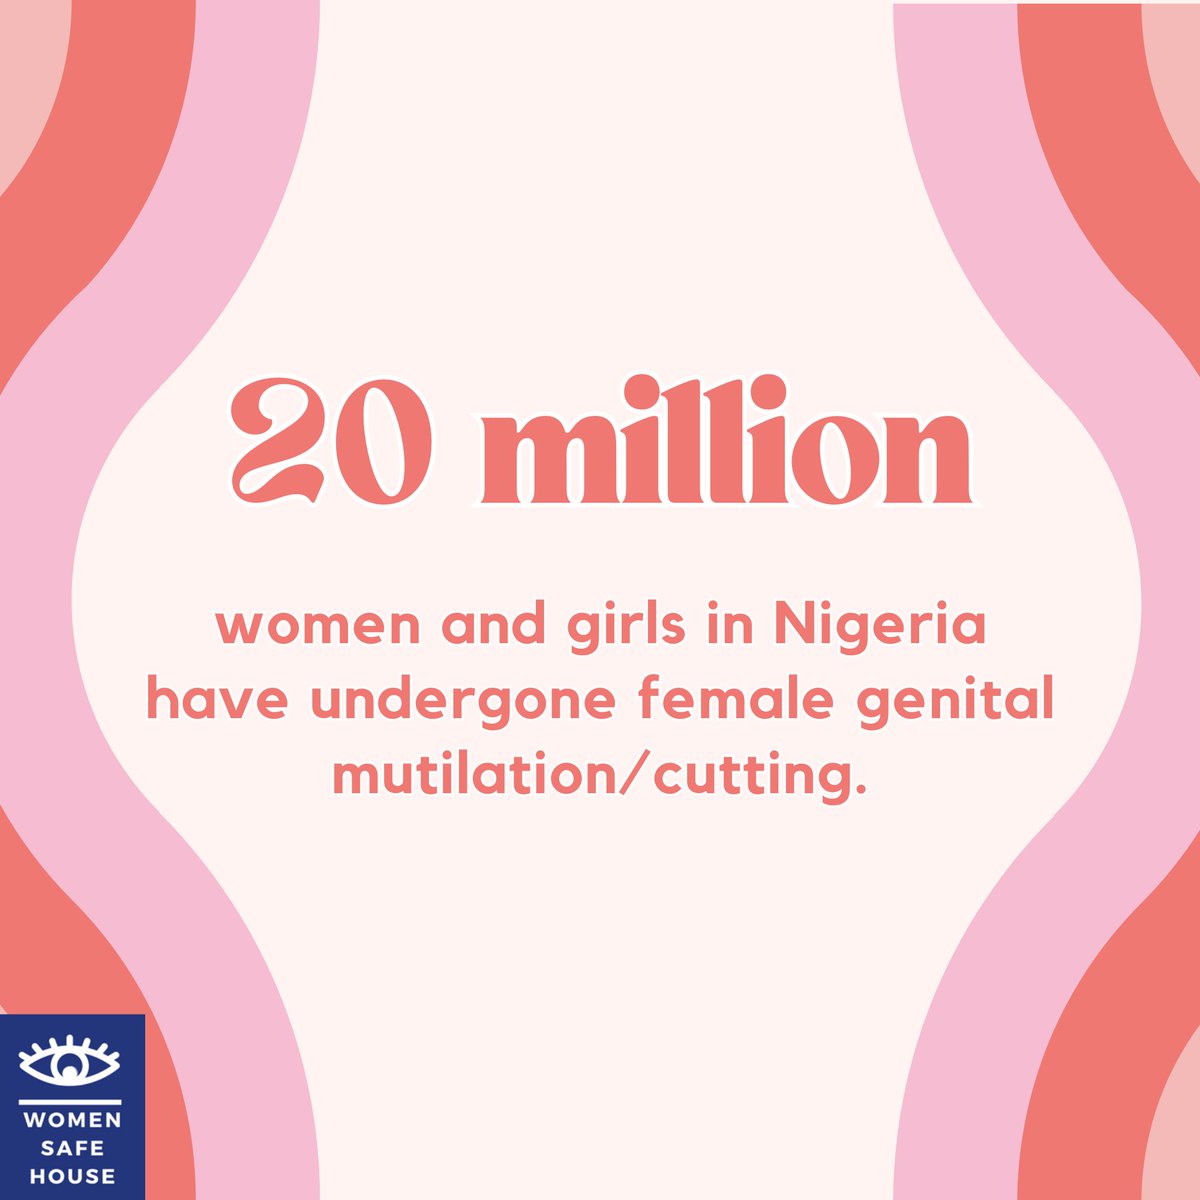 Female genital mutilation/cutting (FGM/C) is a widespread cultural practice that inflicts damage to the female genital organs. See our following posts for more.

#womensafehouse #women #fgmc #endfgmc #endgenderbasedviolence